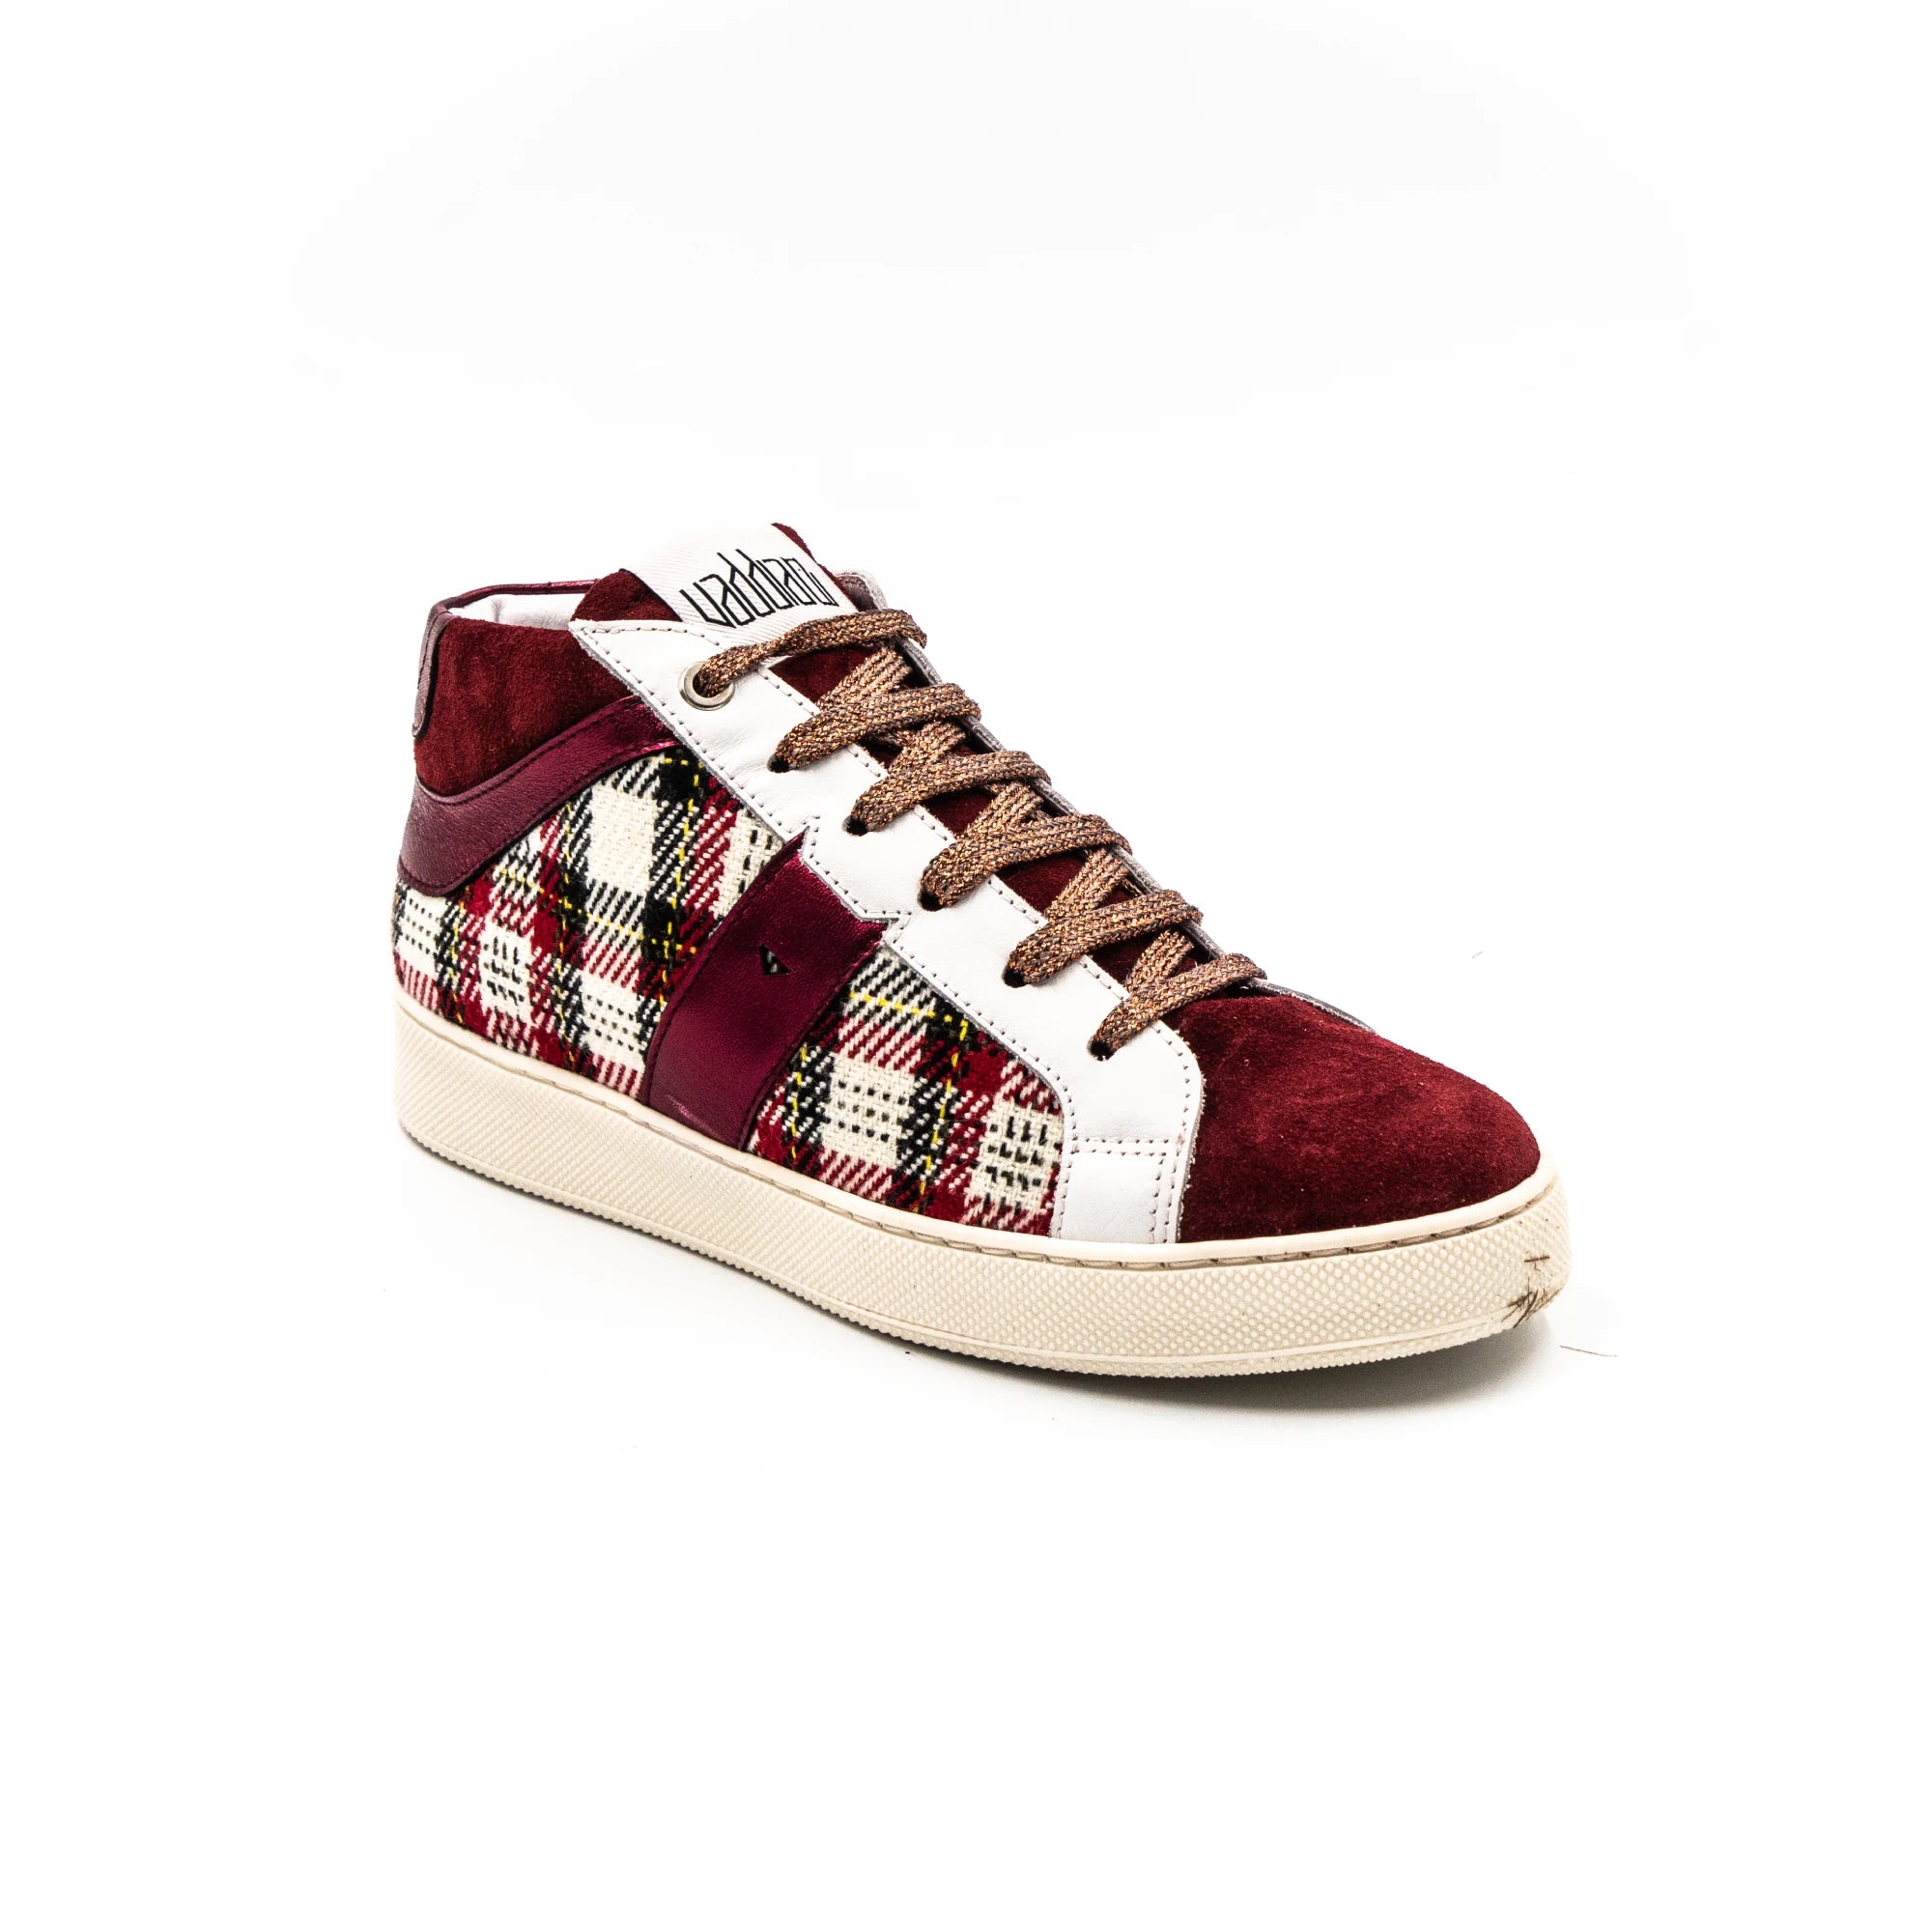 High-top sneakers with a checkered pattern in red, ecru and yellow.